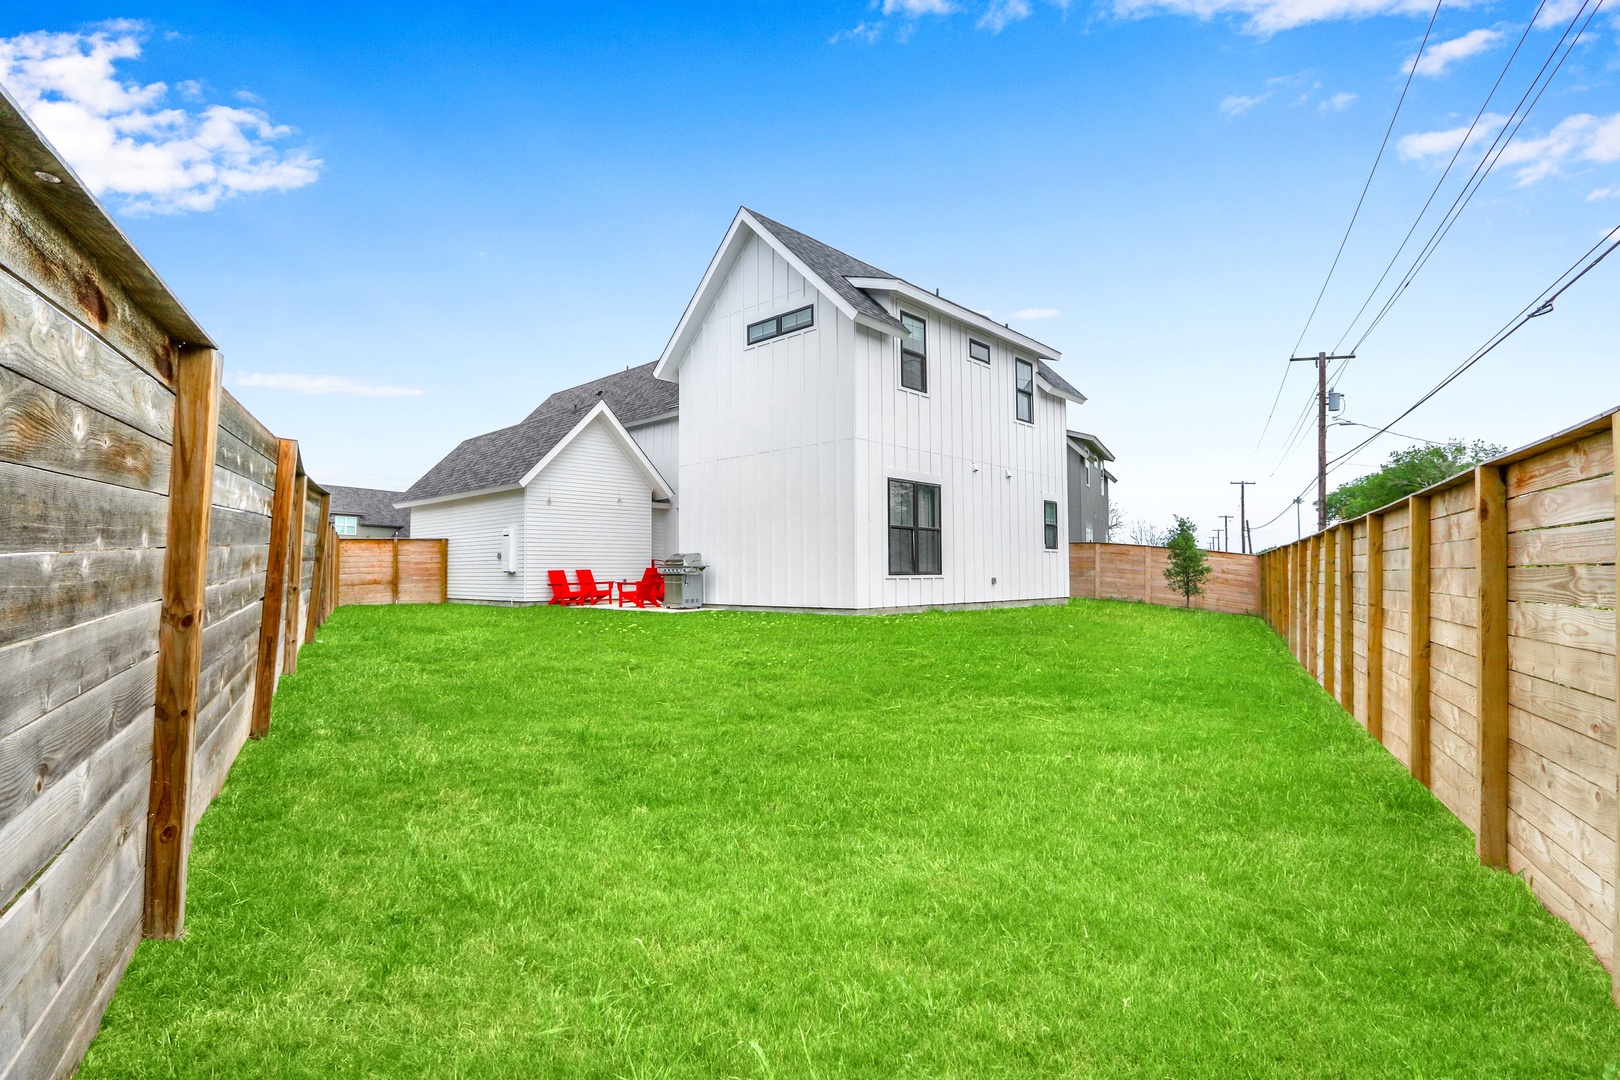 The spacious fenced back yard offers ample space for relaxation & play